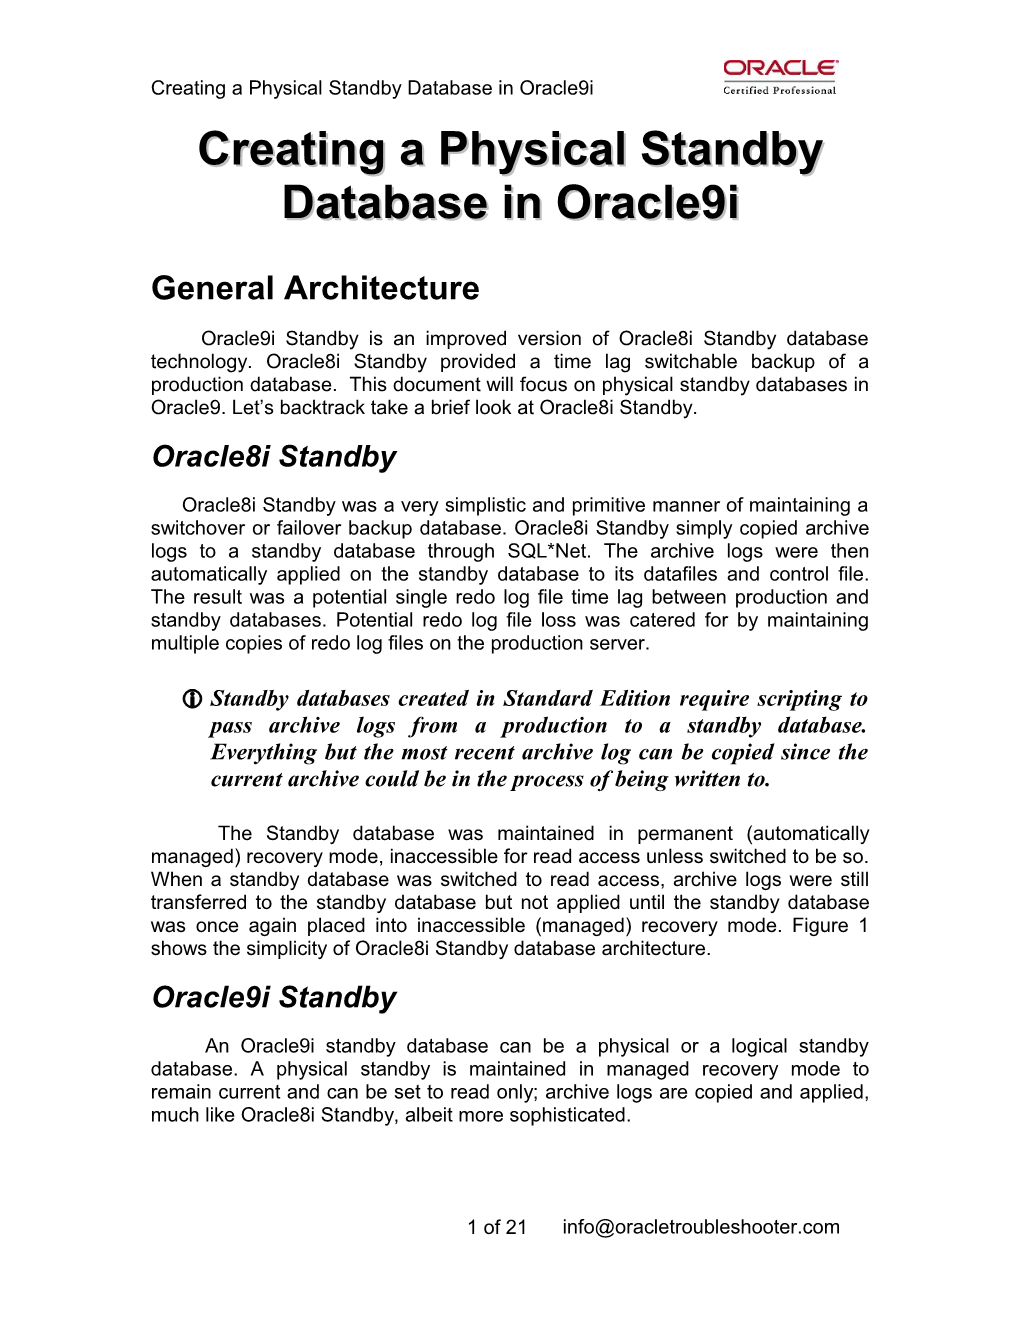 Creating a Physical Standby Database in Oracle9i